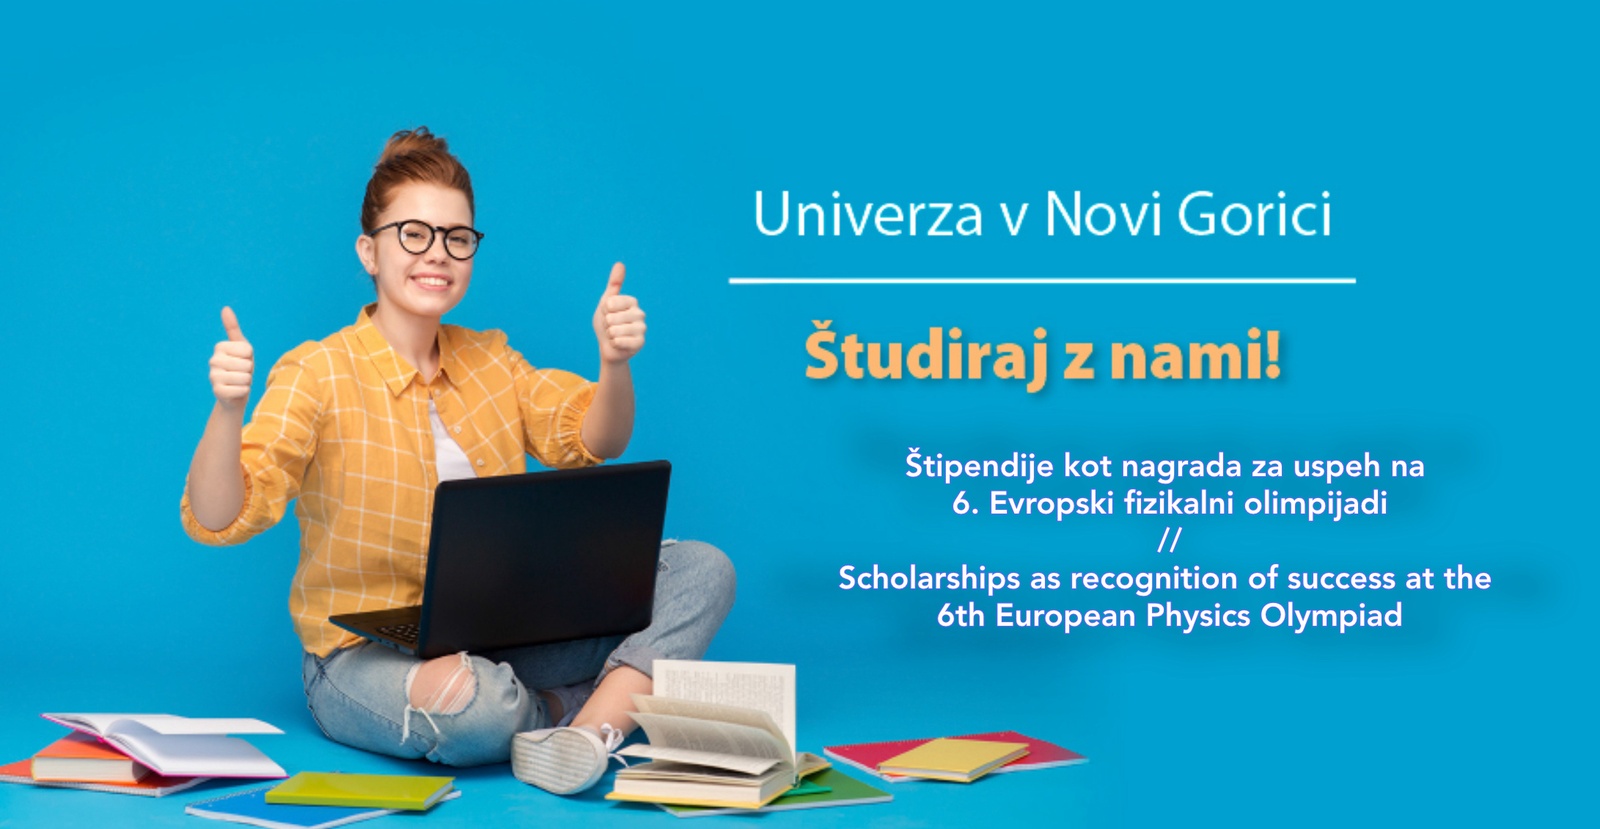 University of Nova Gorica is currently offering scholarships as recognition of success at the 6th European Physics Olympiad, Ljubljana, May 20 - 24, 2022